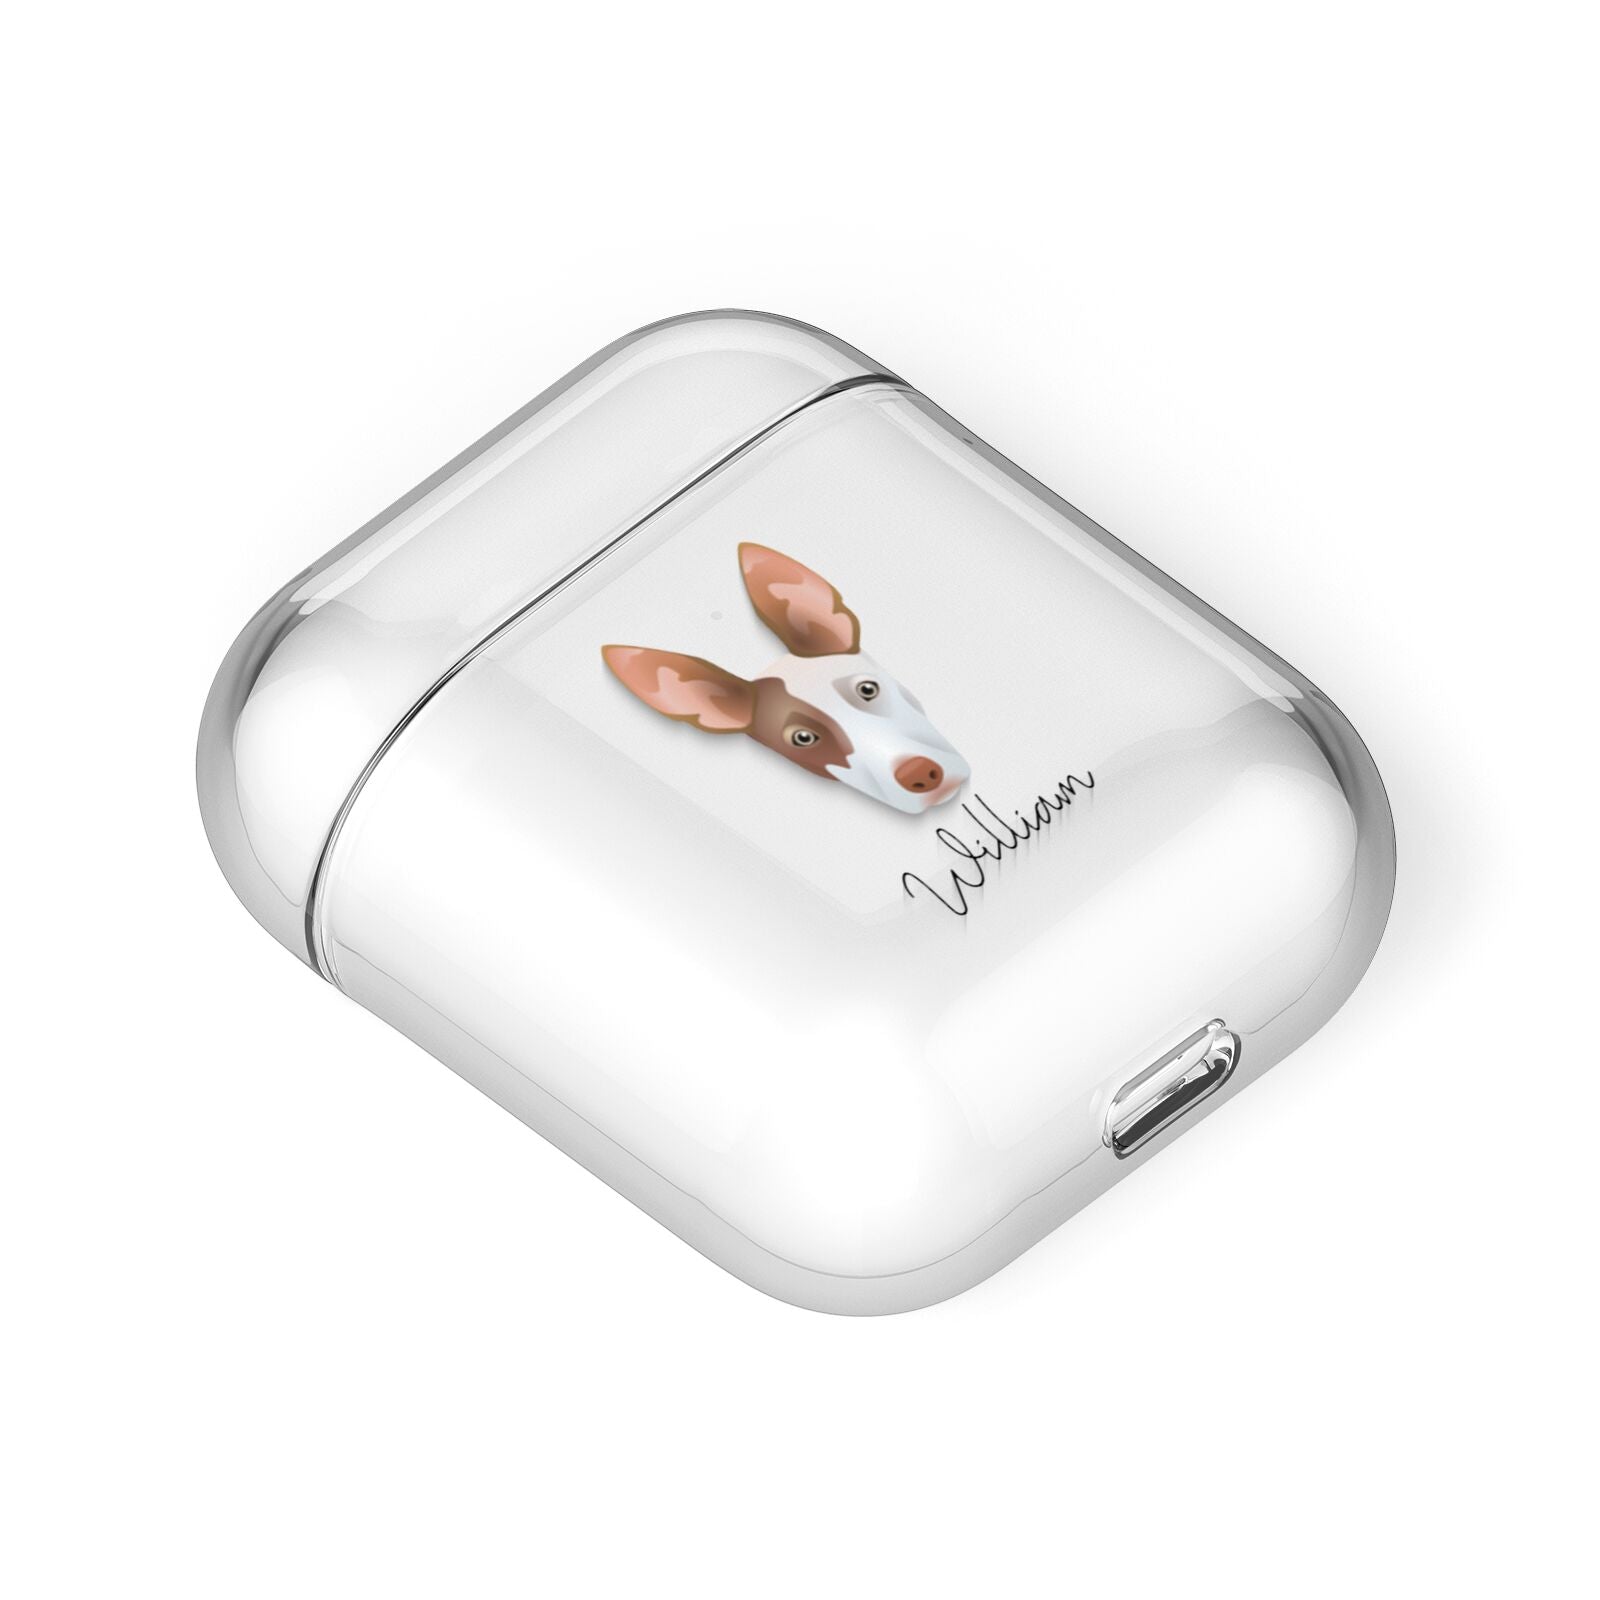 Ibizan Hound Personalised AirPods Case Laid Flat